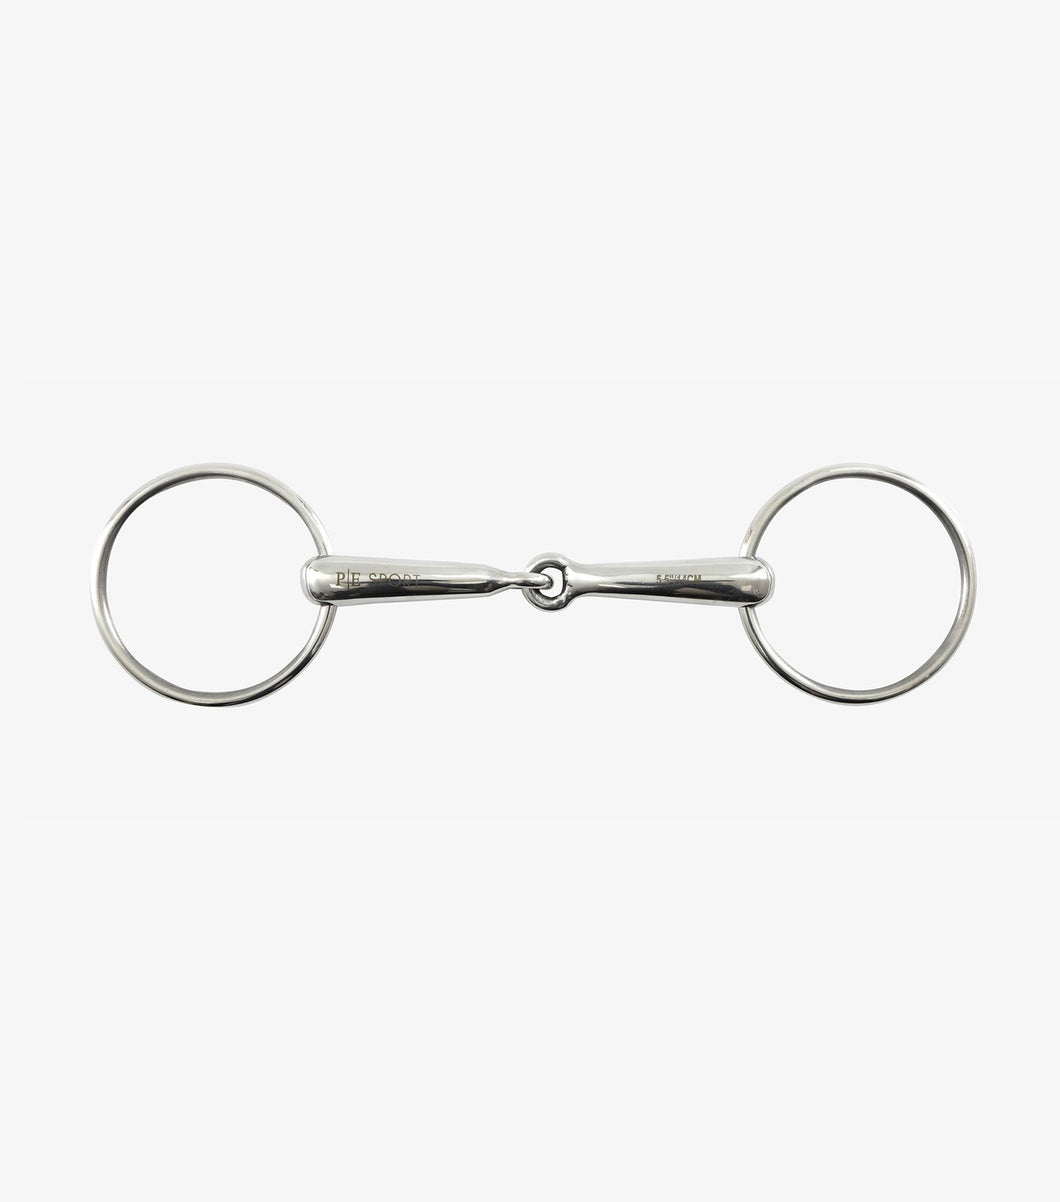 Hollow Mouth Race Snaffle. Horse Racing Bit